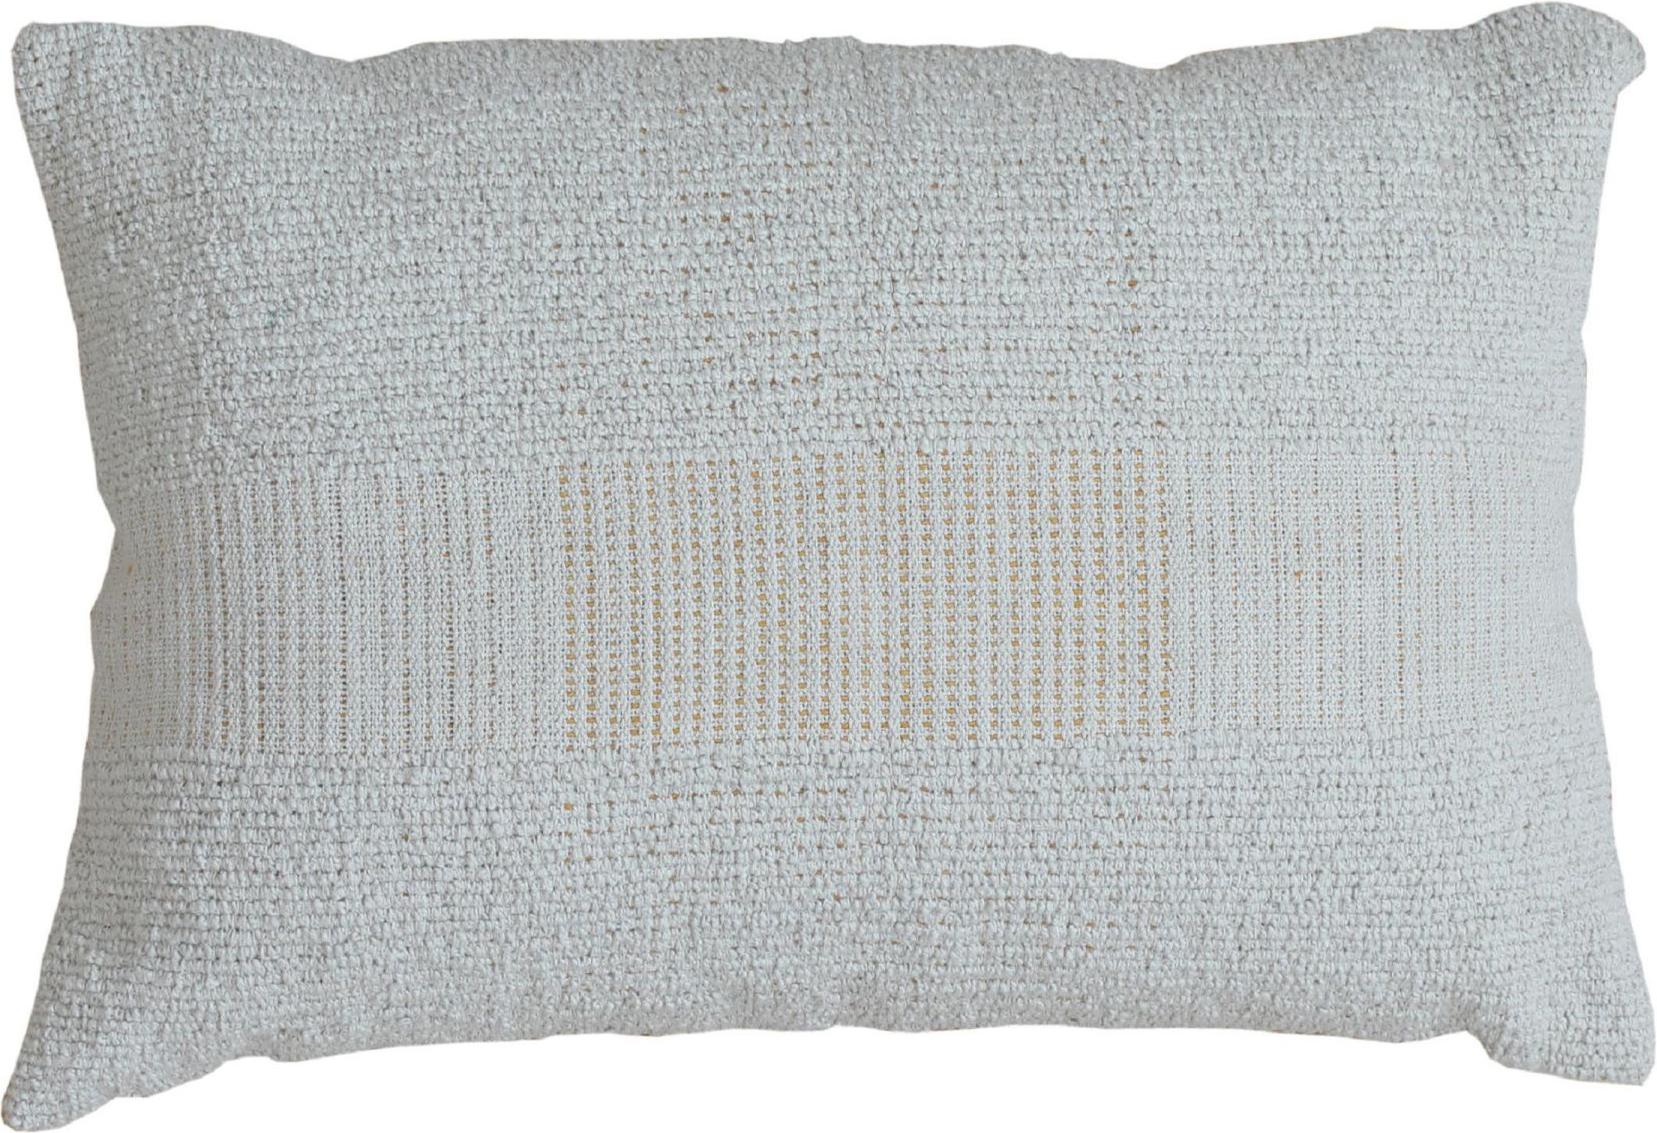 Elevate your home's look with a chic Modern Wool and Cotton Pillow, meticulously handmade with opulent materials, in a 16